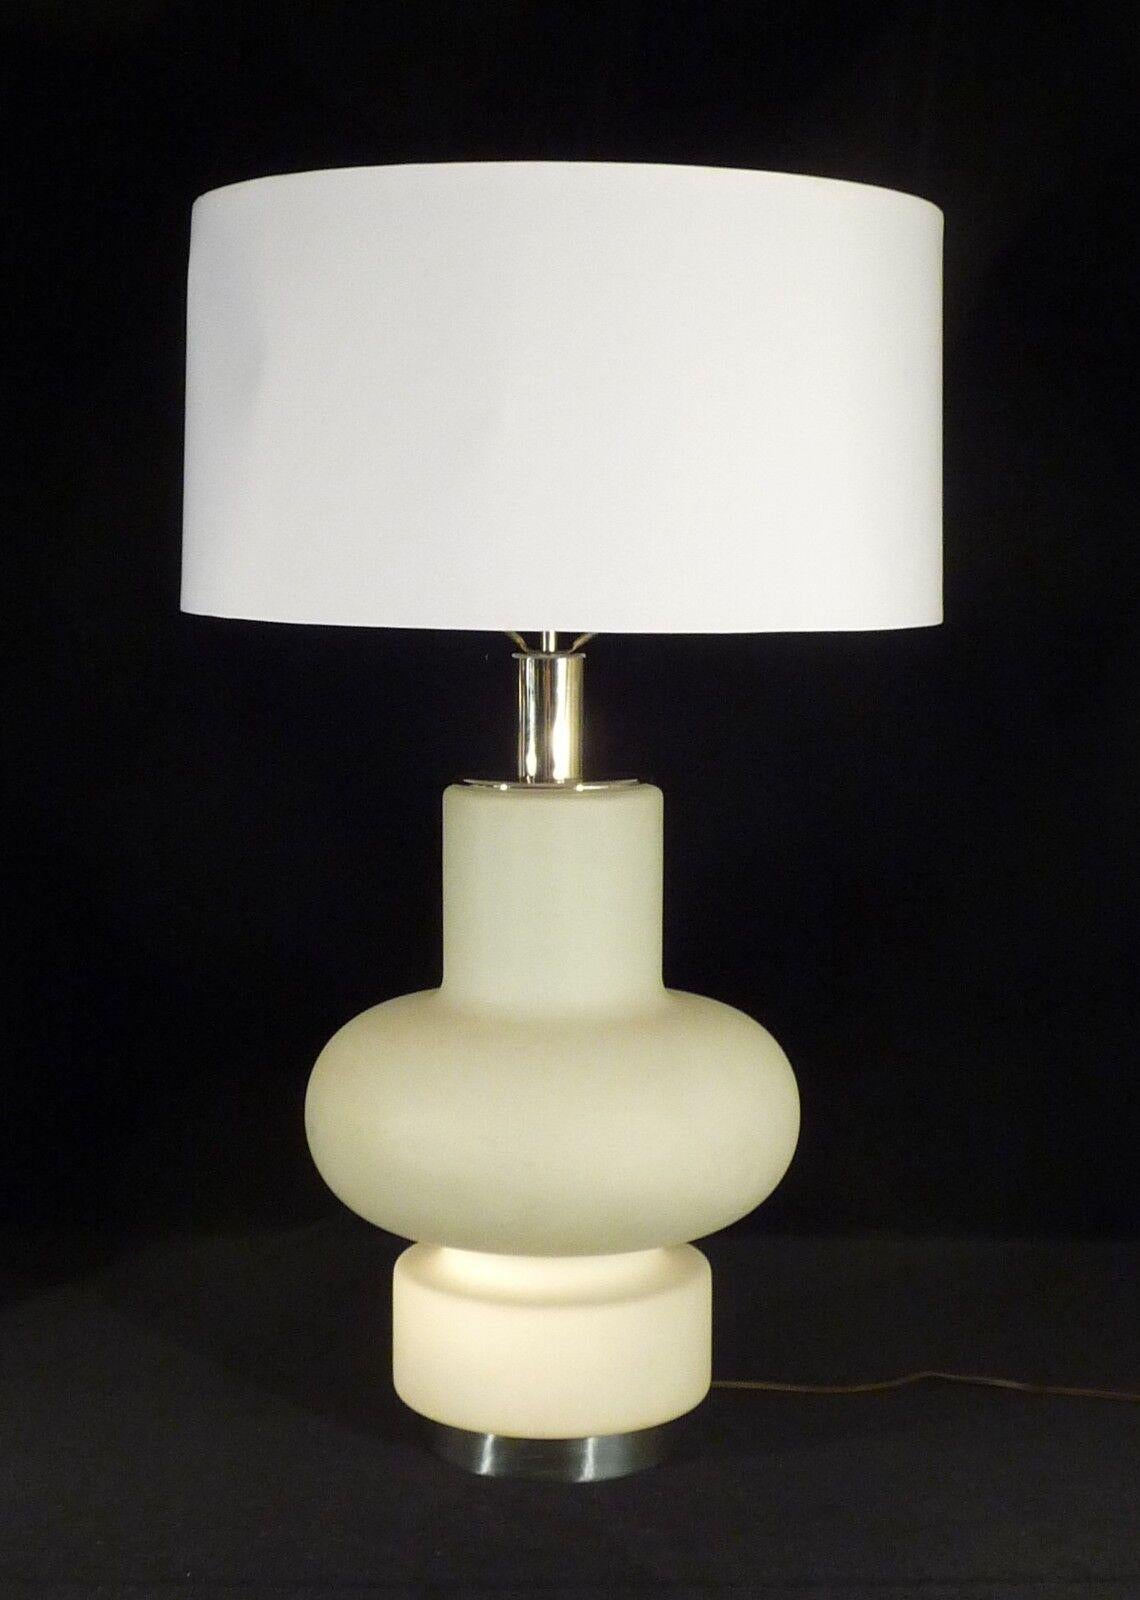 For your consideration is this pair of large and impressive Italian mid-century modern sculptural frosted white glass column table lamps with nickel accented elements. Designed by Bobo Piccoli for Laurel Lamp Co in the 1970s 
In very good vintage